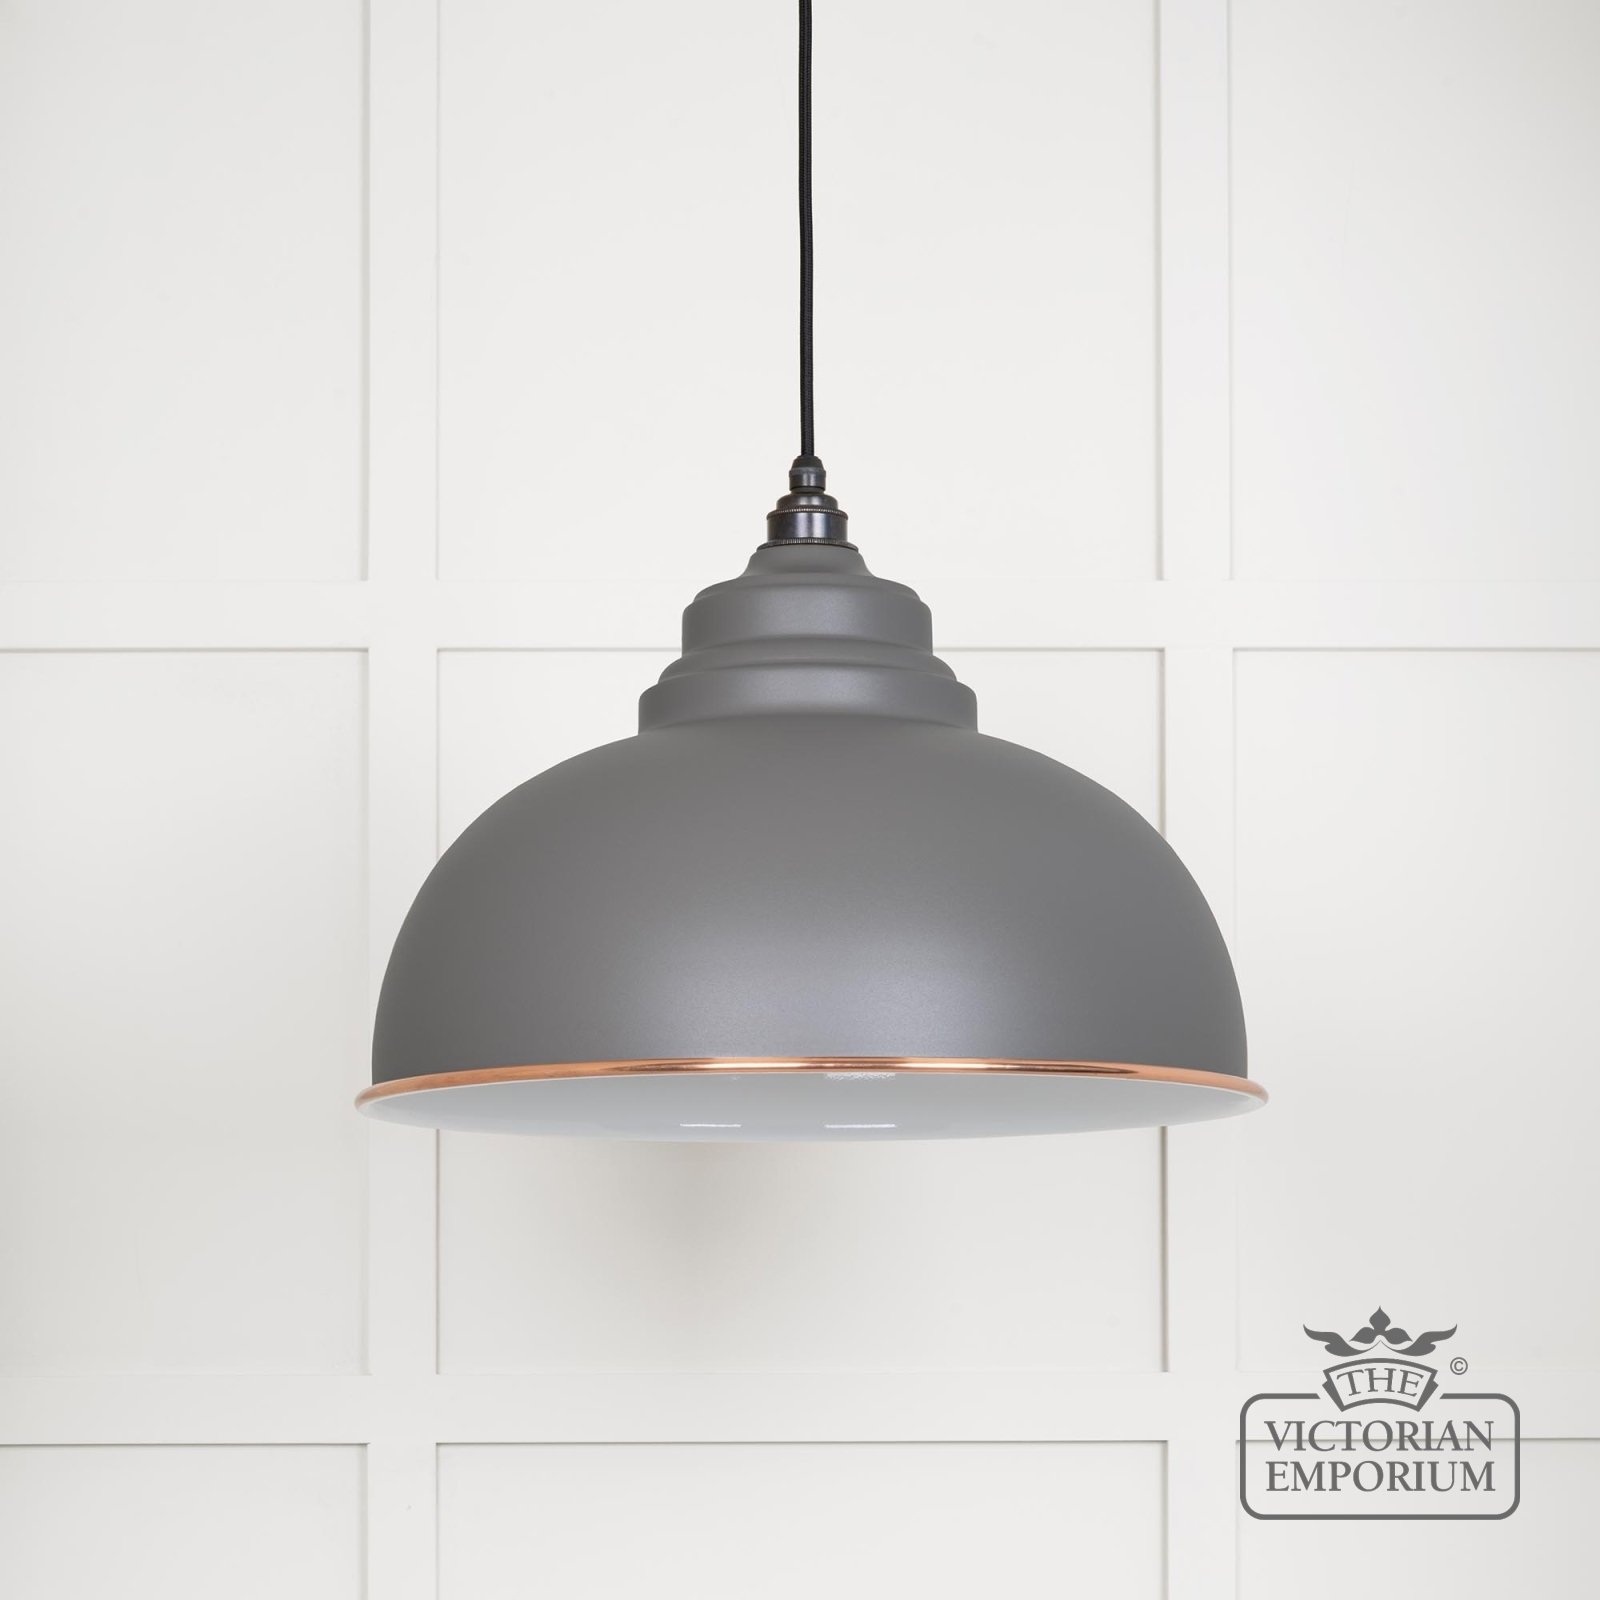 Harlow pendant light in Bluff with white gloss interior